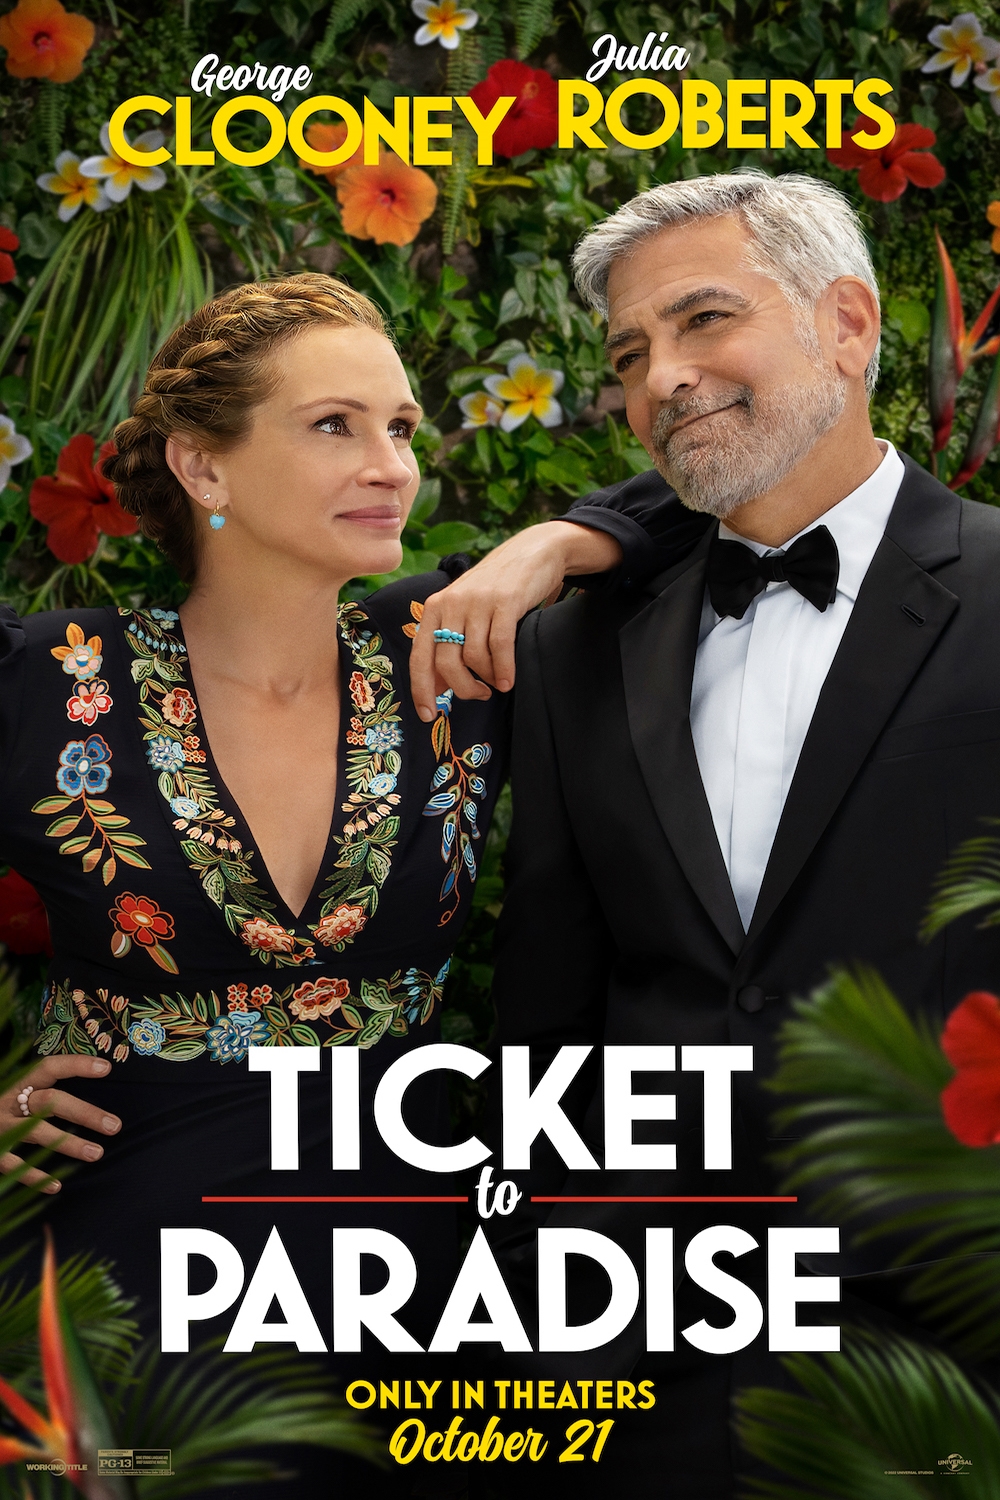 George Clooney and Julia Roberts in Ticket to Paradise (2022)